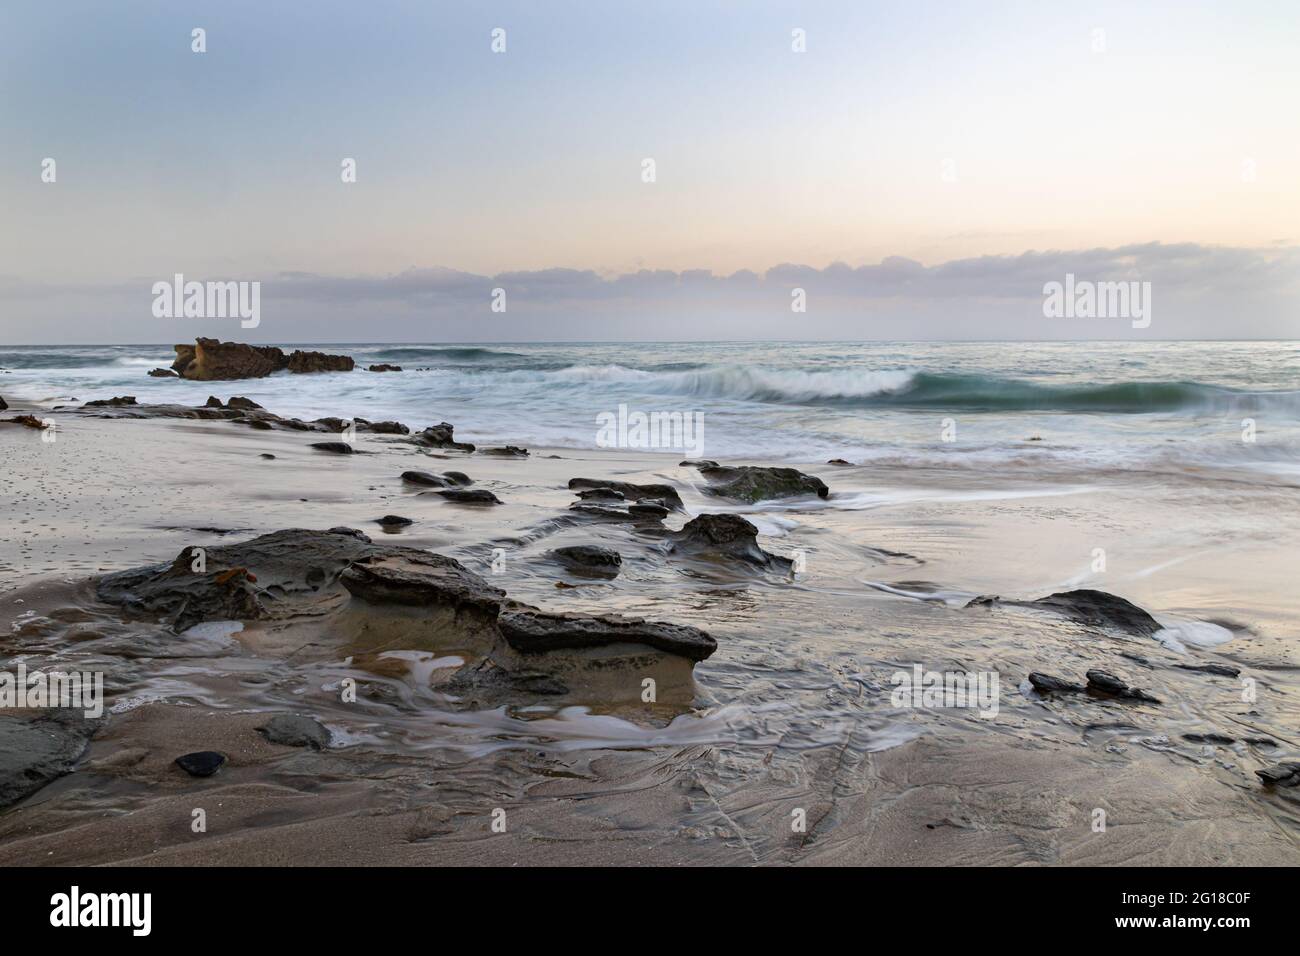 Weathered rocks amongst the sand in Laguna Beach, California. Waves and more rocks offshore. Early morning sky with clouds in the far distance. Stock Photo